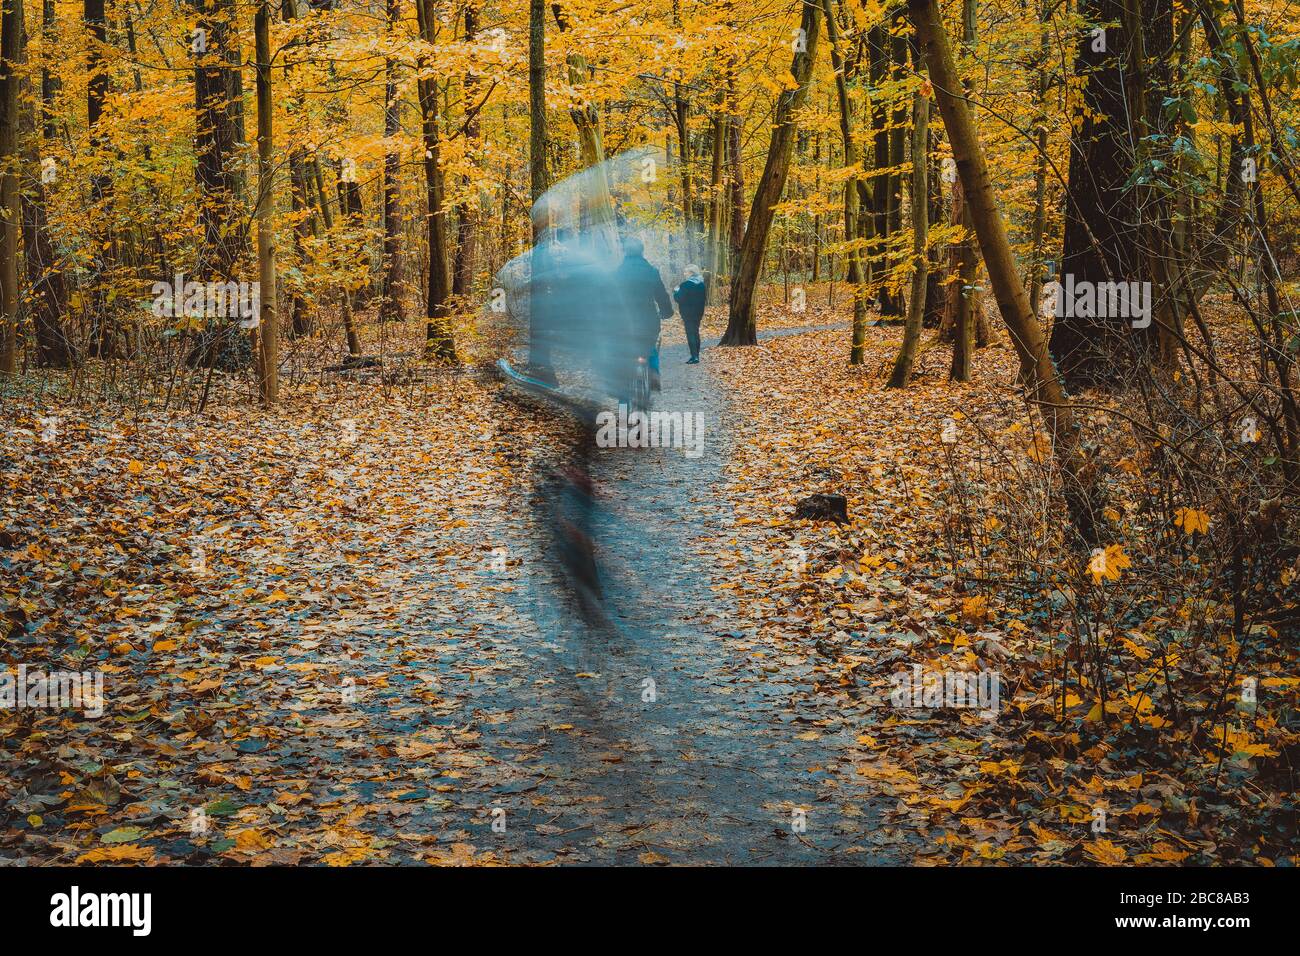 Ghostly figures in autumnal square, autumn forest landscape, trees with yellow leaves and alleys. Stock Photo